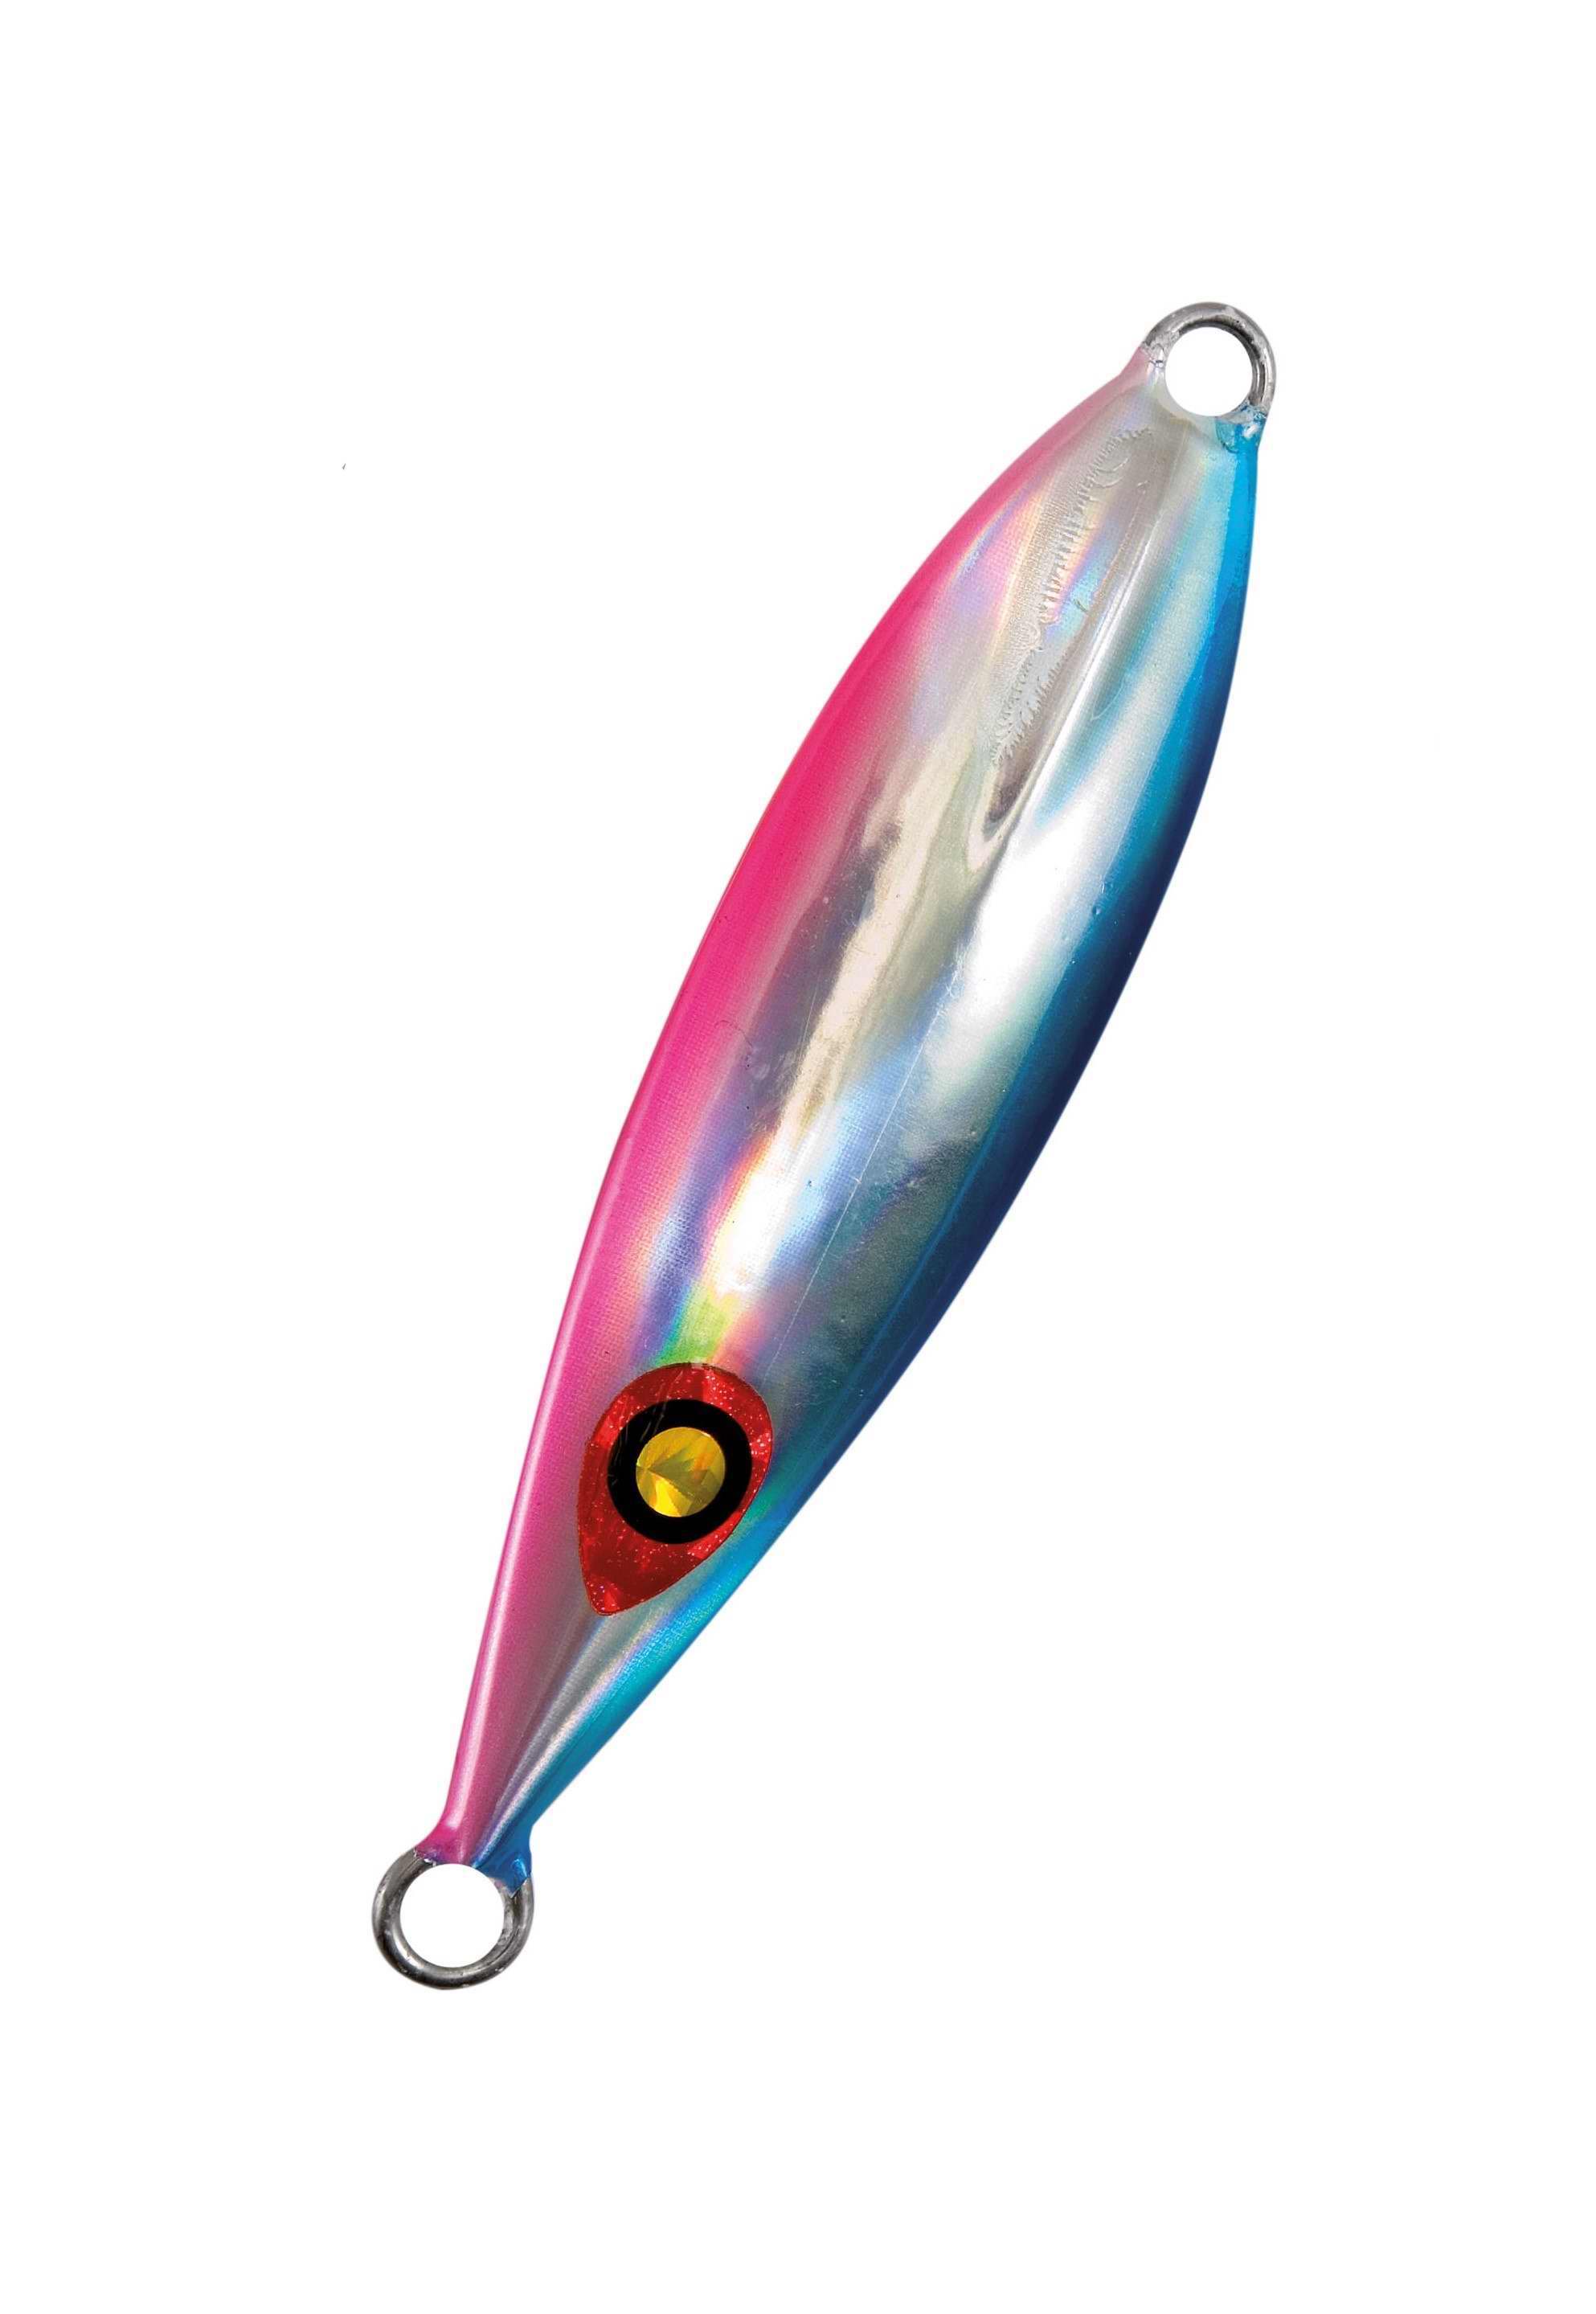 OUT/OUT_ARTICOLI/areapesca.it_AP01059.3168.3162_izu-slow-pitch-95-cm---80-gr-light-blue--e--pink-red-eye.jpg